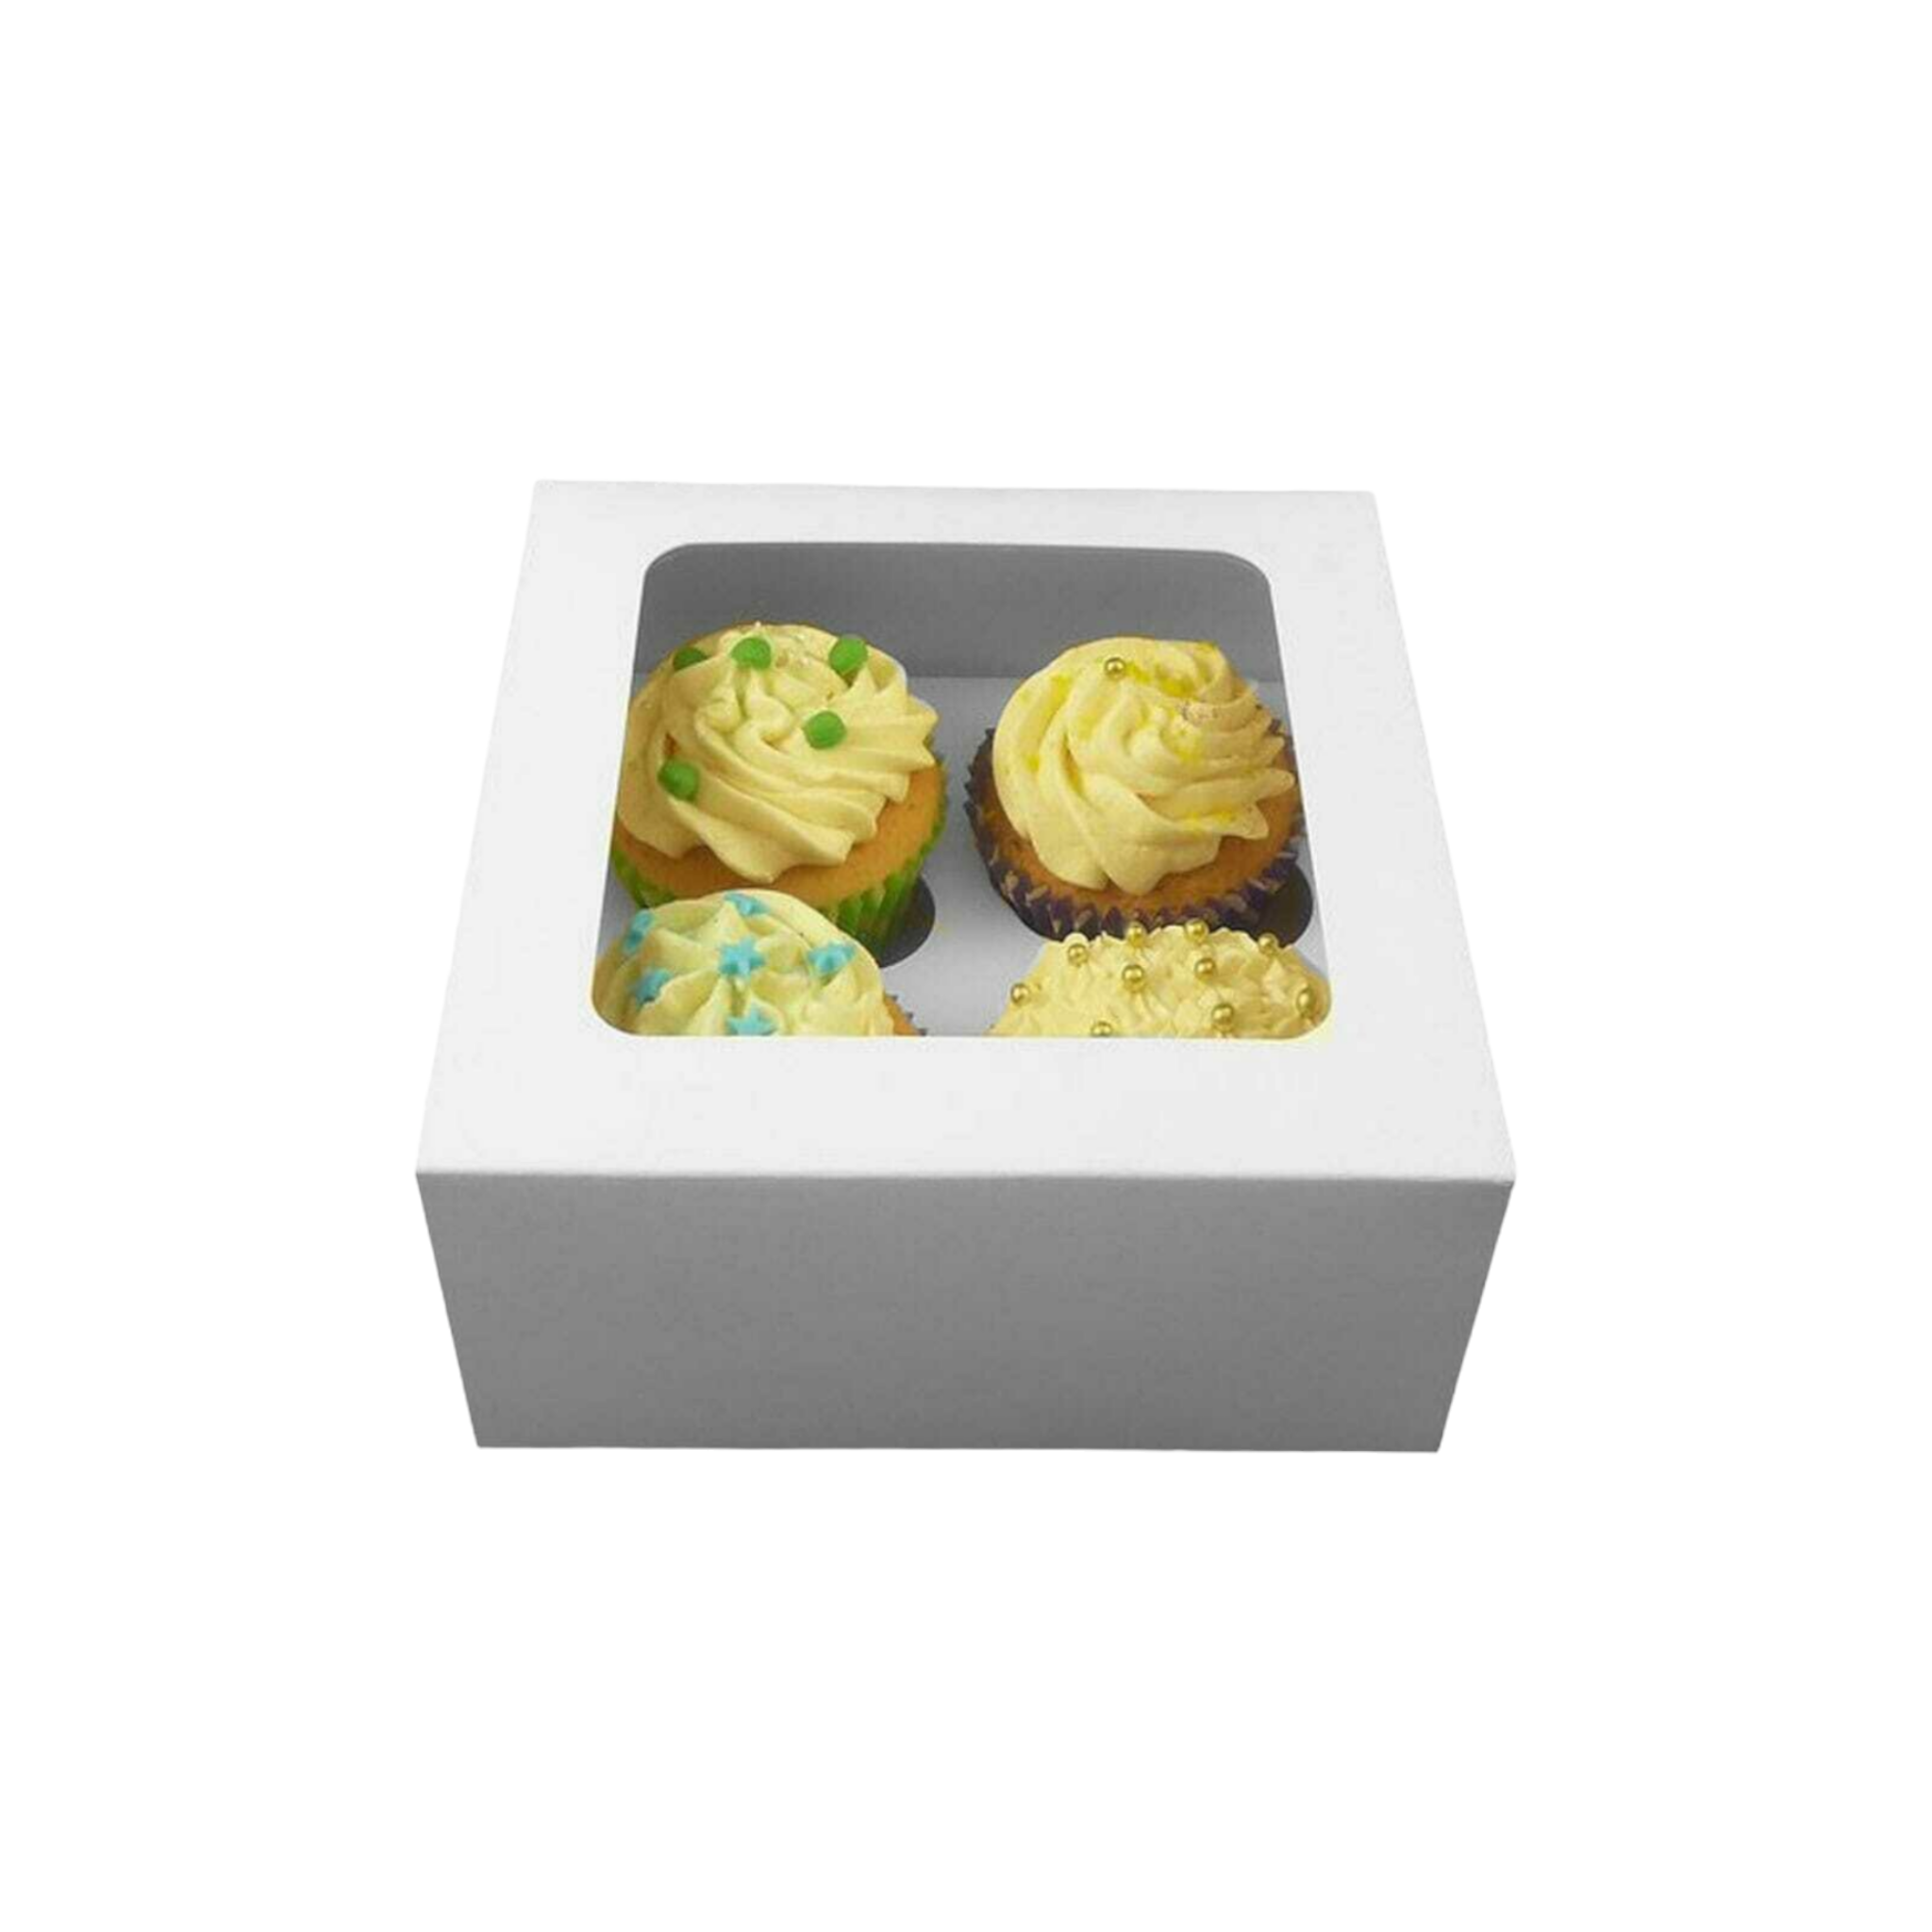 Muffin Cupcake Biscuit Card Box White 12-Cup 33x22.8x7.6cm 4pack